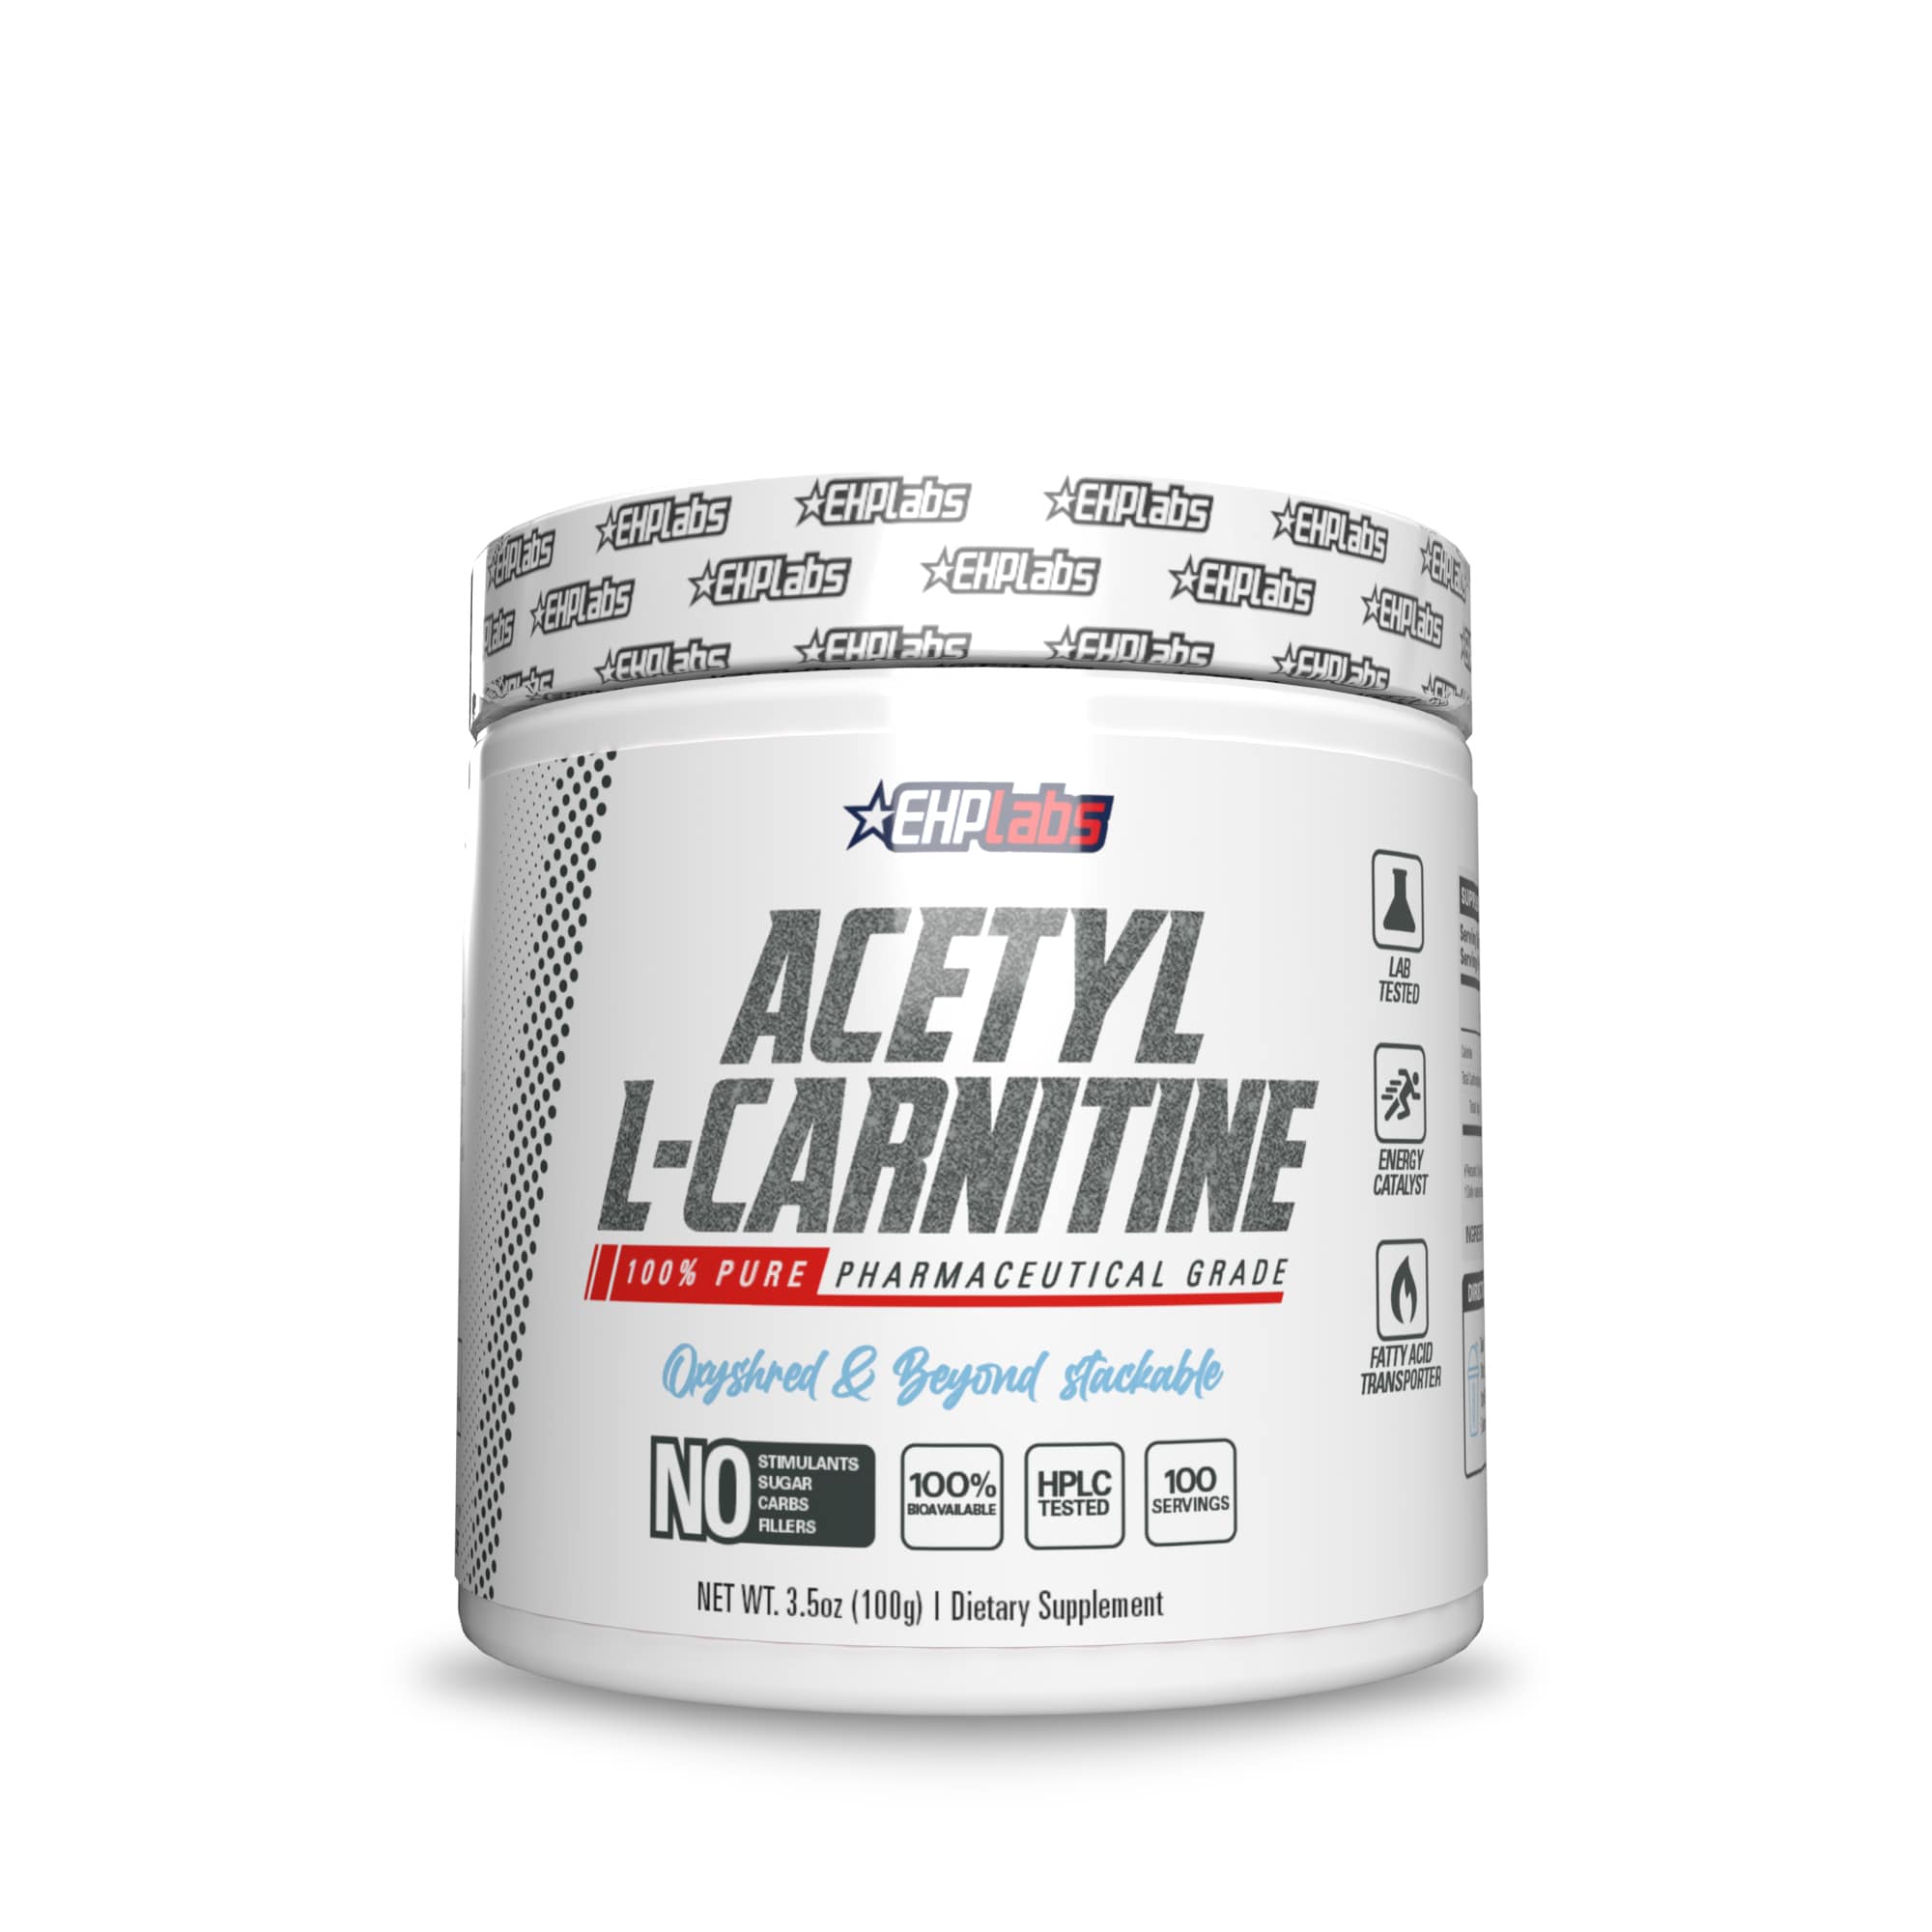 Fitness Hero presents, EHP Labs 100% Pure Acetyl L-Carnitine a non-stimulant amino acid that plays an important role in supporting your weight loss journey. L-Carnitine is as diverse as it is effective, it's&nbsp;designed to support your body’s metabolism, converting fat into energy. L-Carnitine is one of the most widely used natural nutritional supplements for athletes to assist with recovery, training fatigue and weight loss, it's also known to increases brain function.